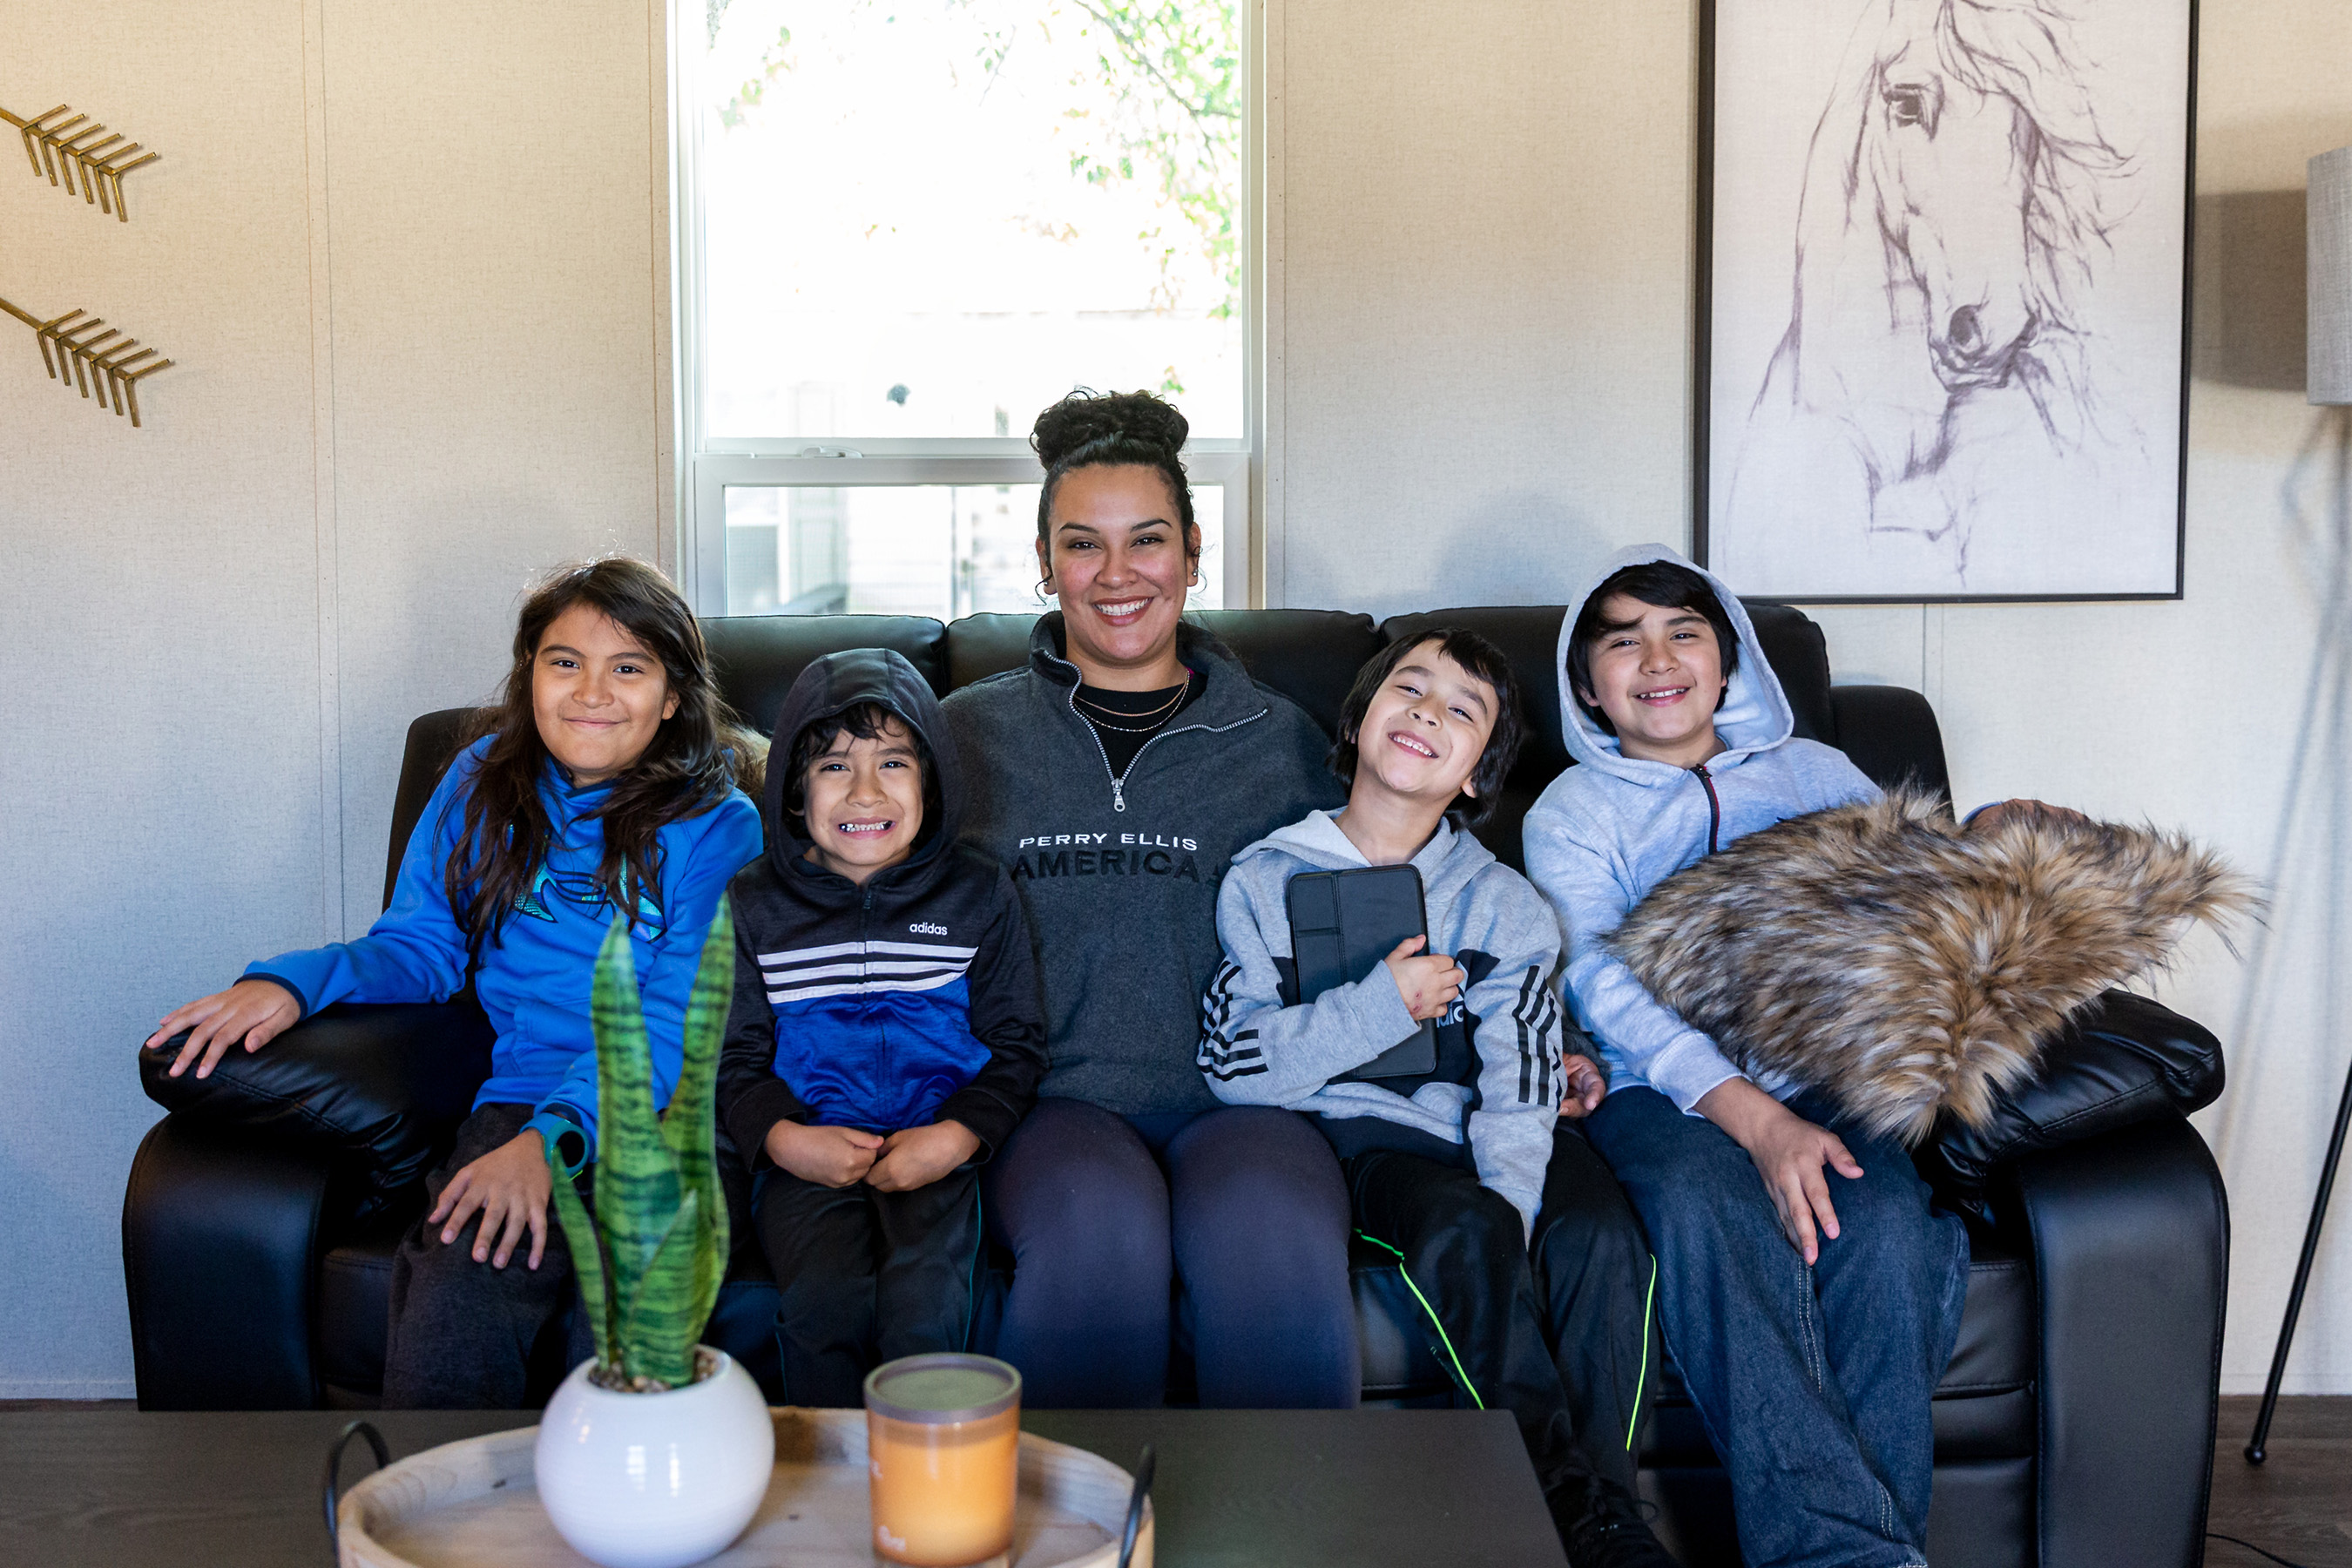 Clayton and Family Promise are unified in the belief that stable housing provides the foundation of a strong future for families. The programs provided by Family Promise help families achieve sustainable financial independence.